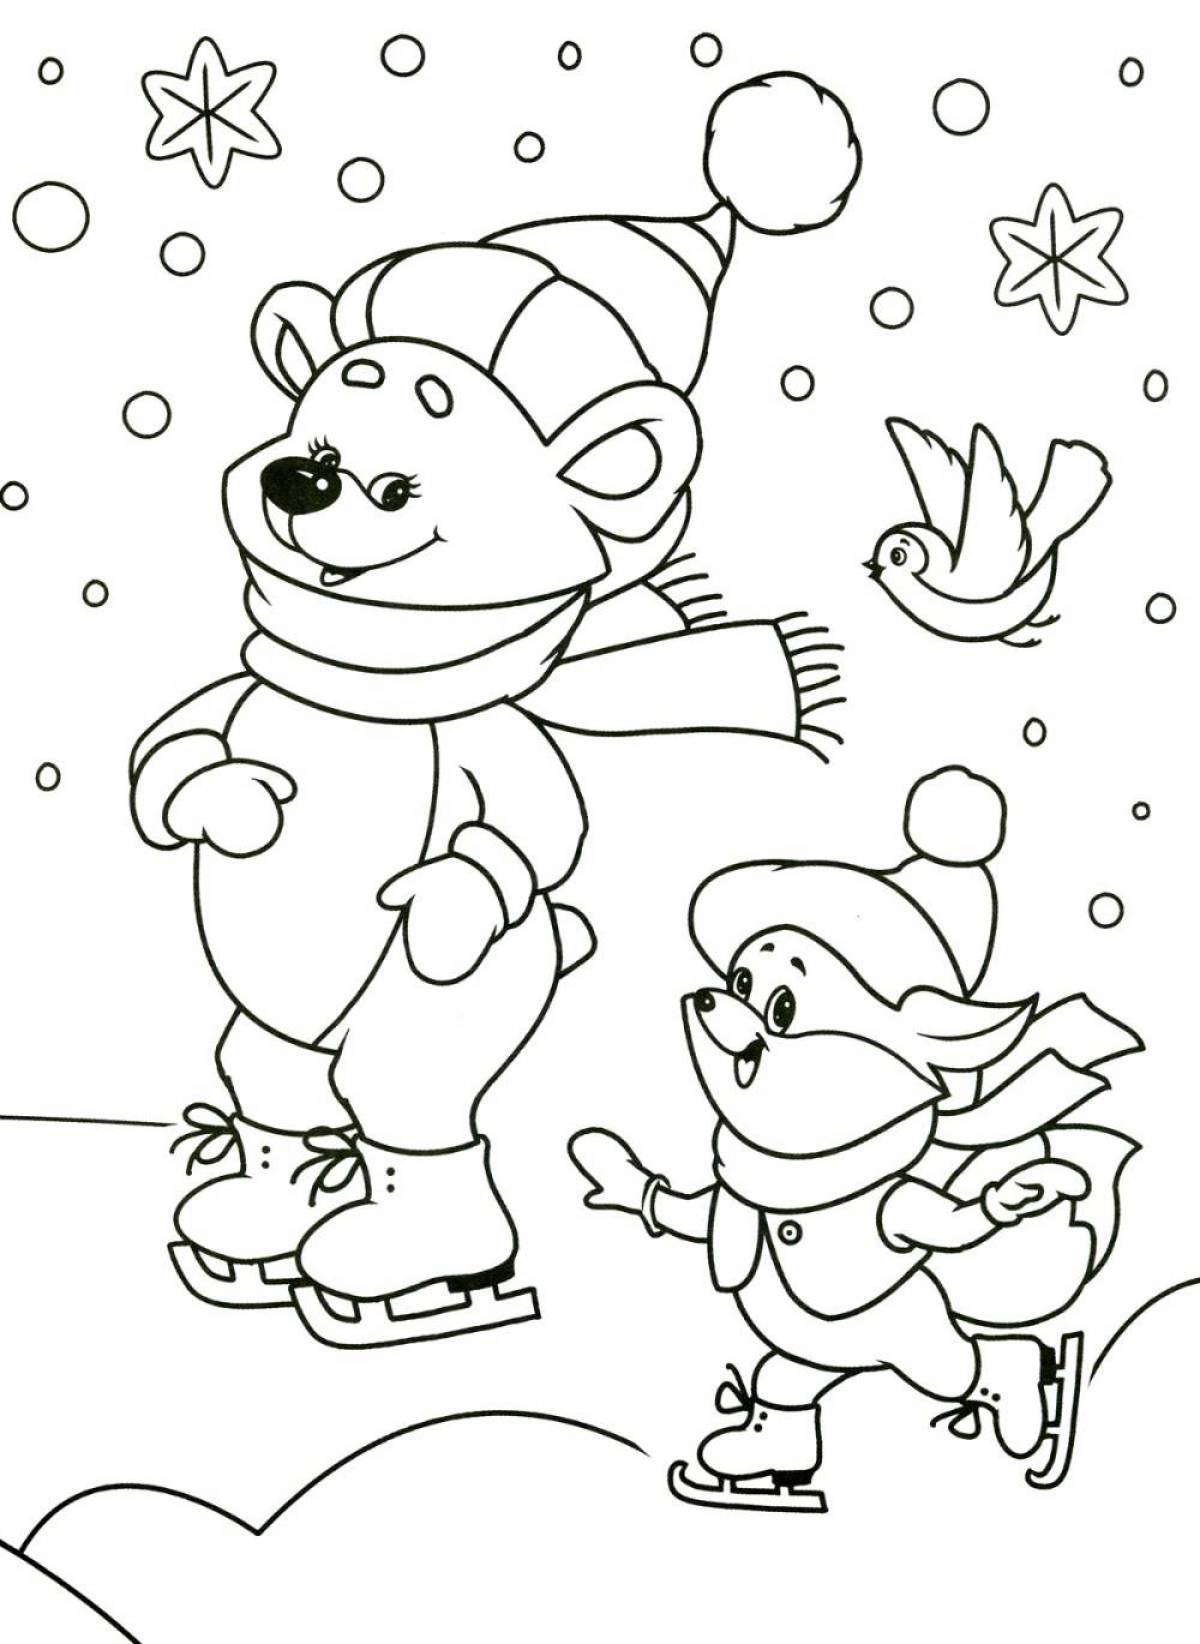 Exquisite winter coloring book for children 4-5 years old